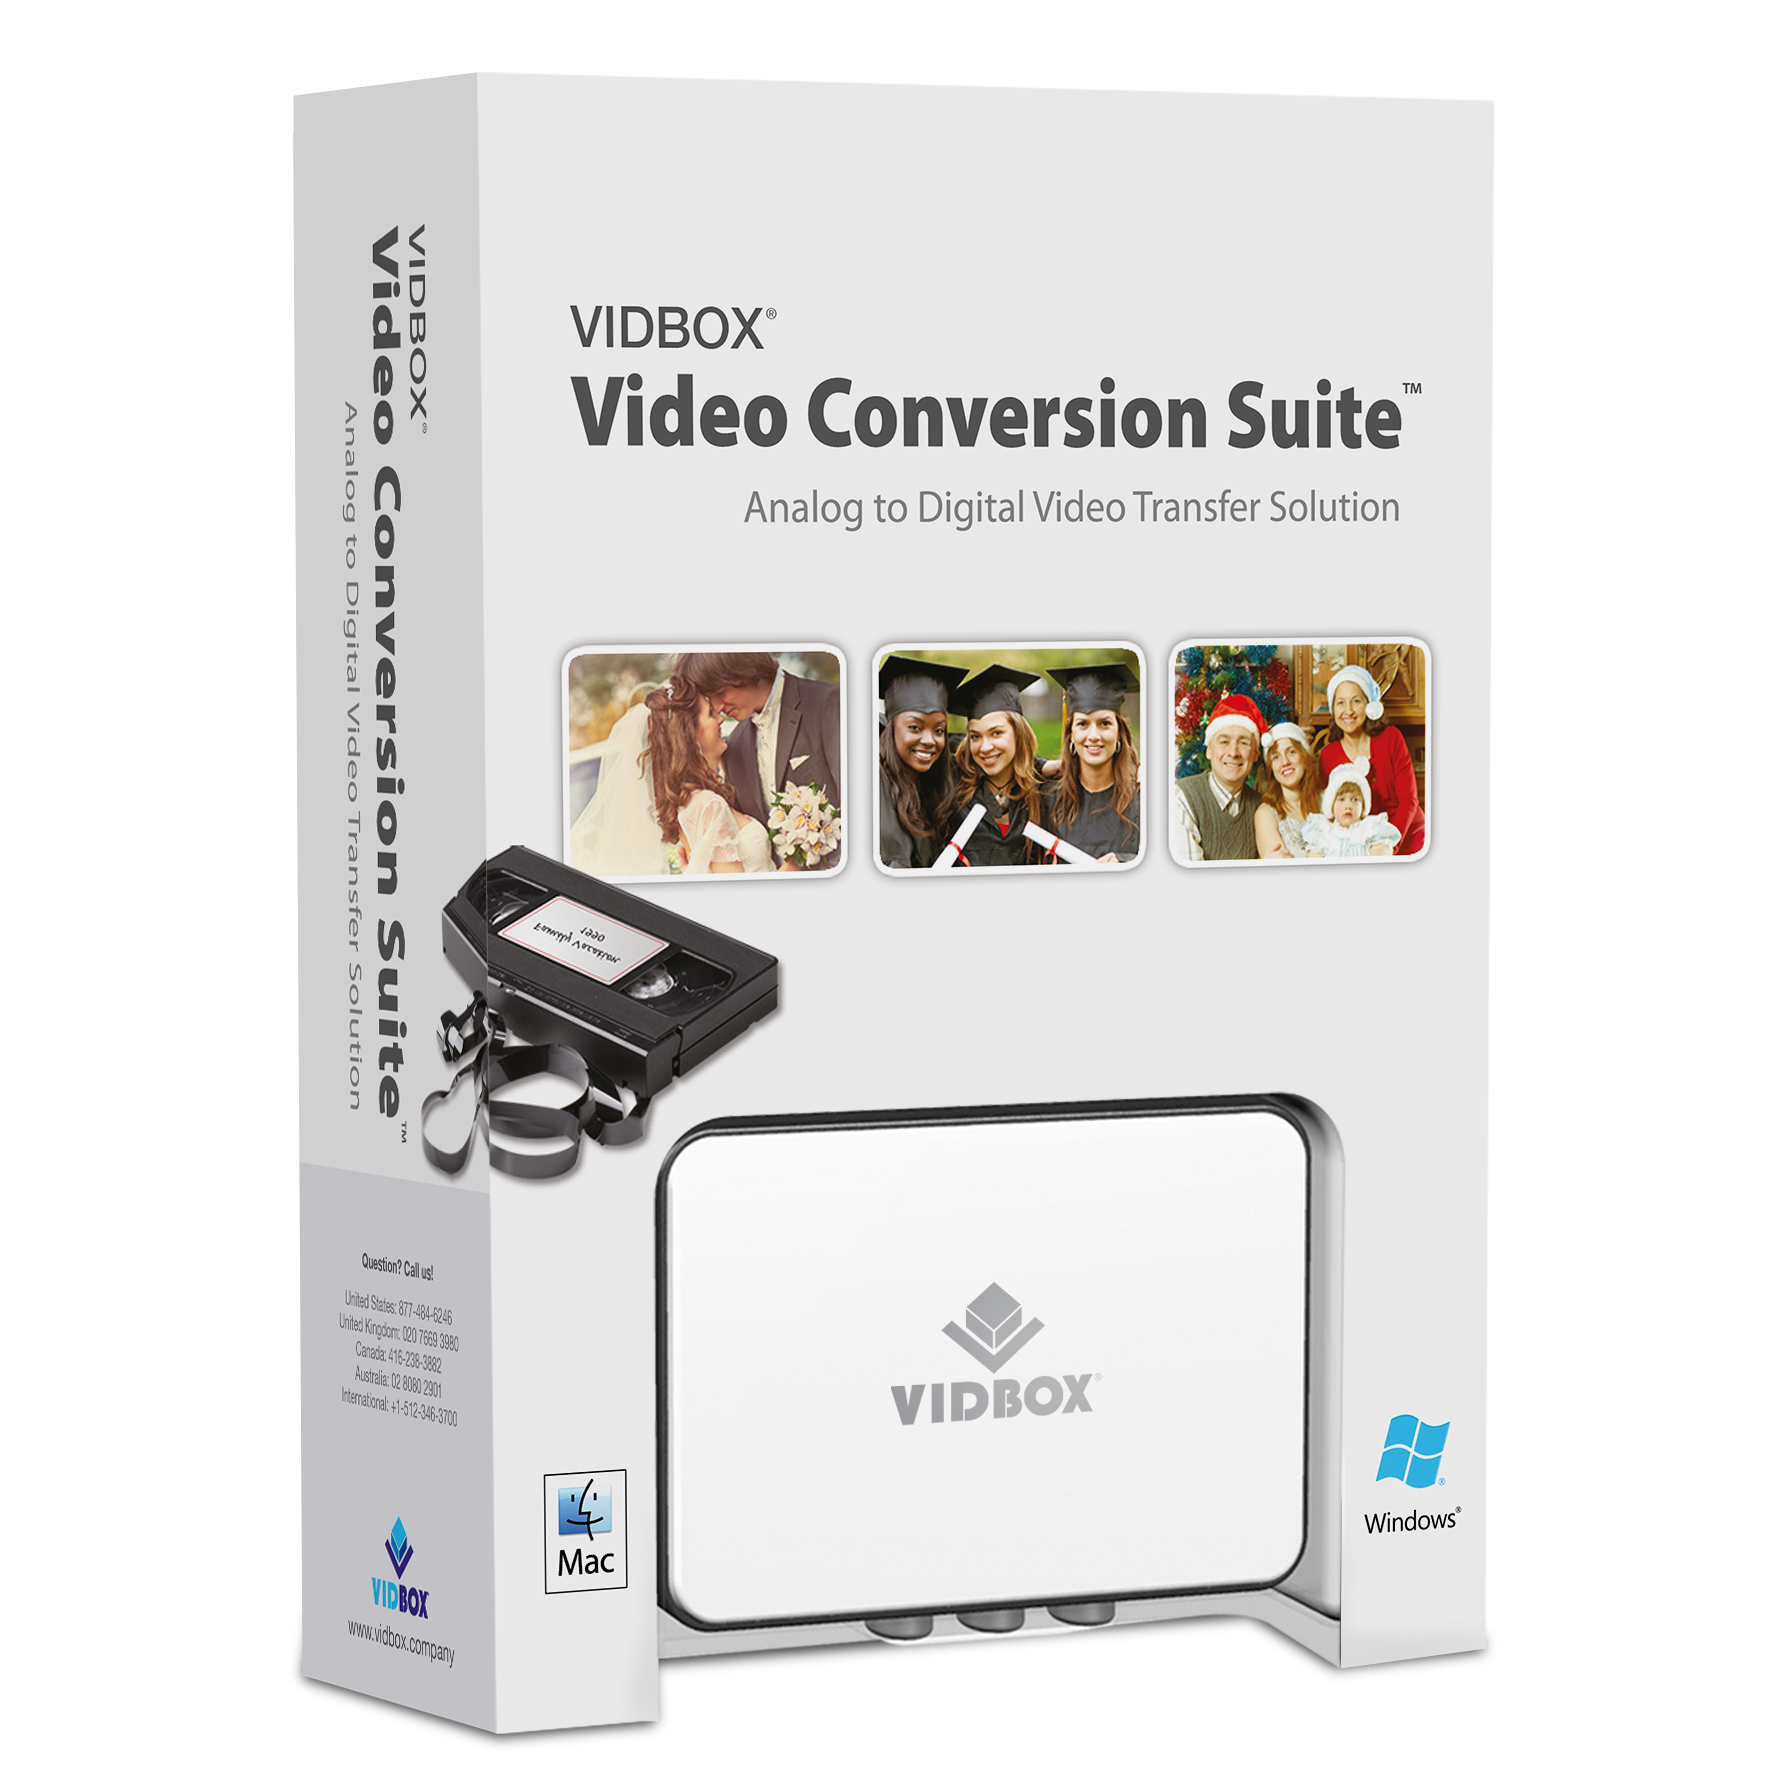 VHS to DVD USB Conversion Kit and Software